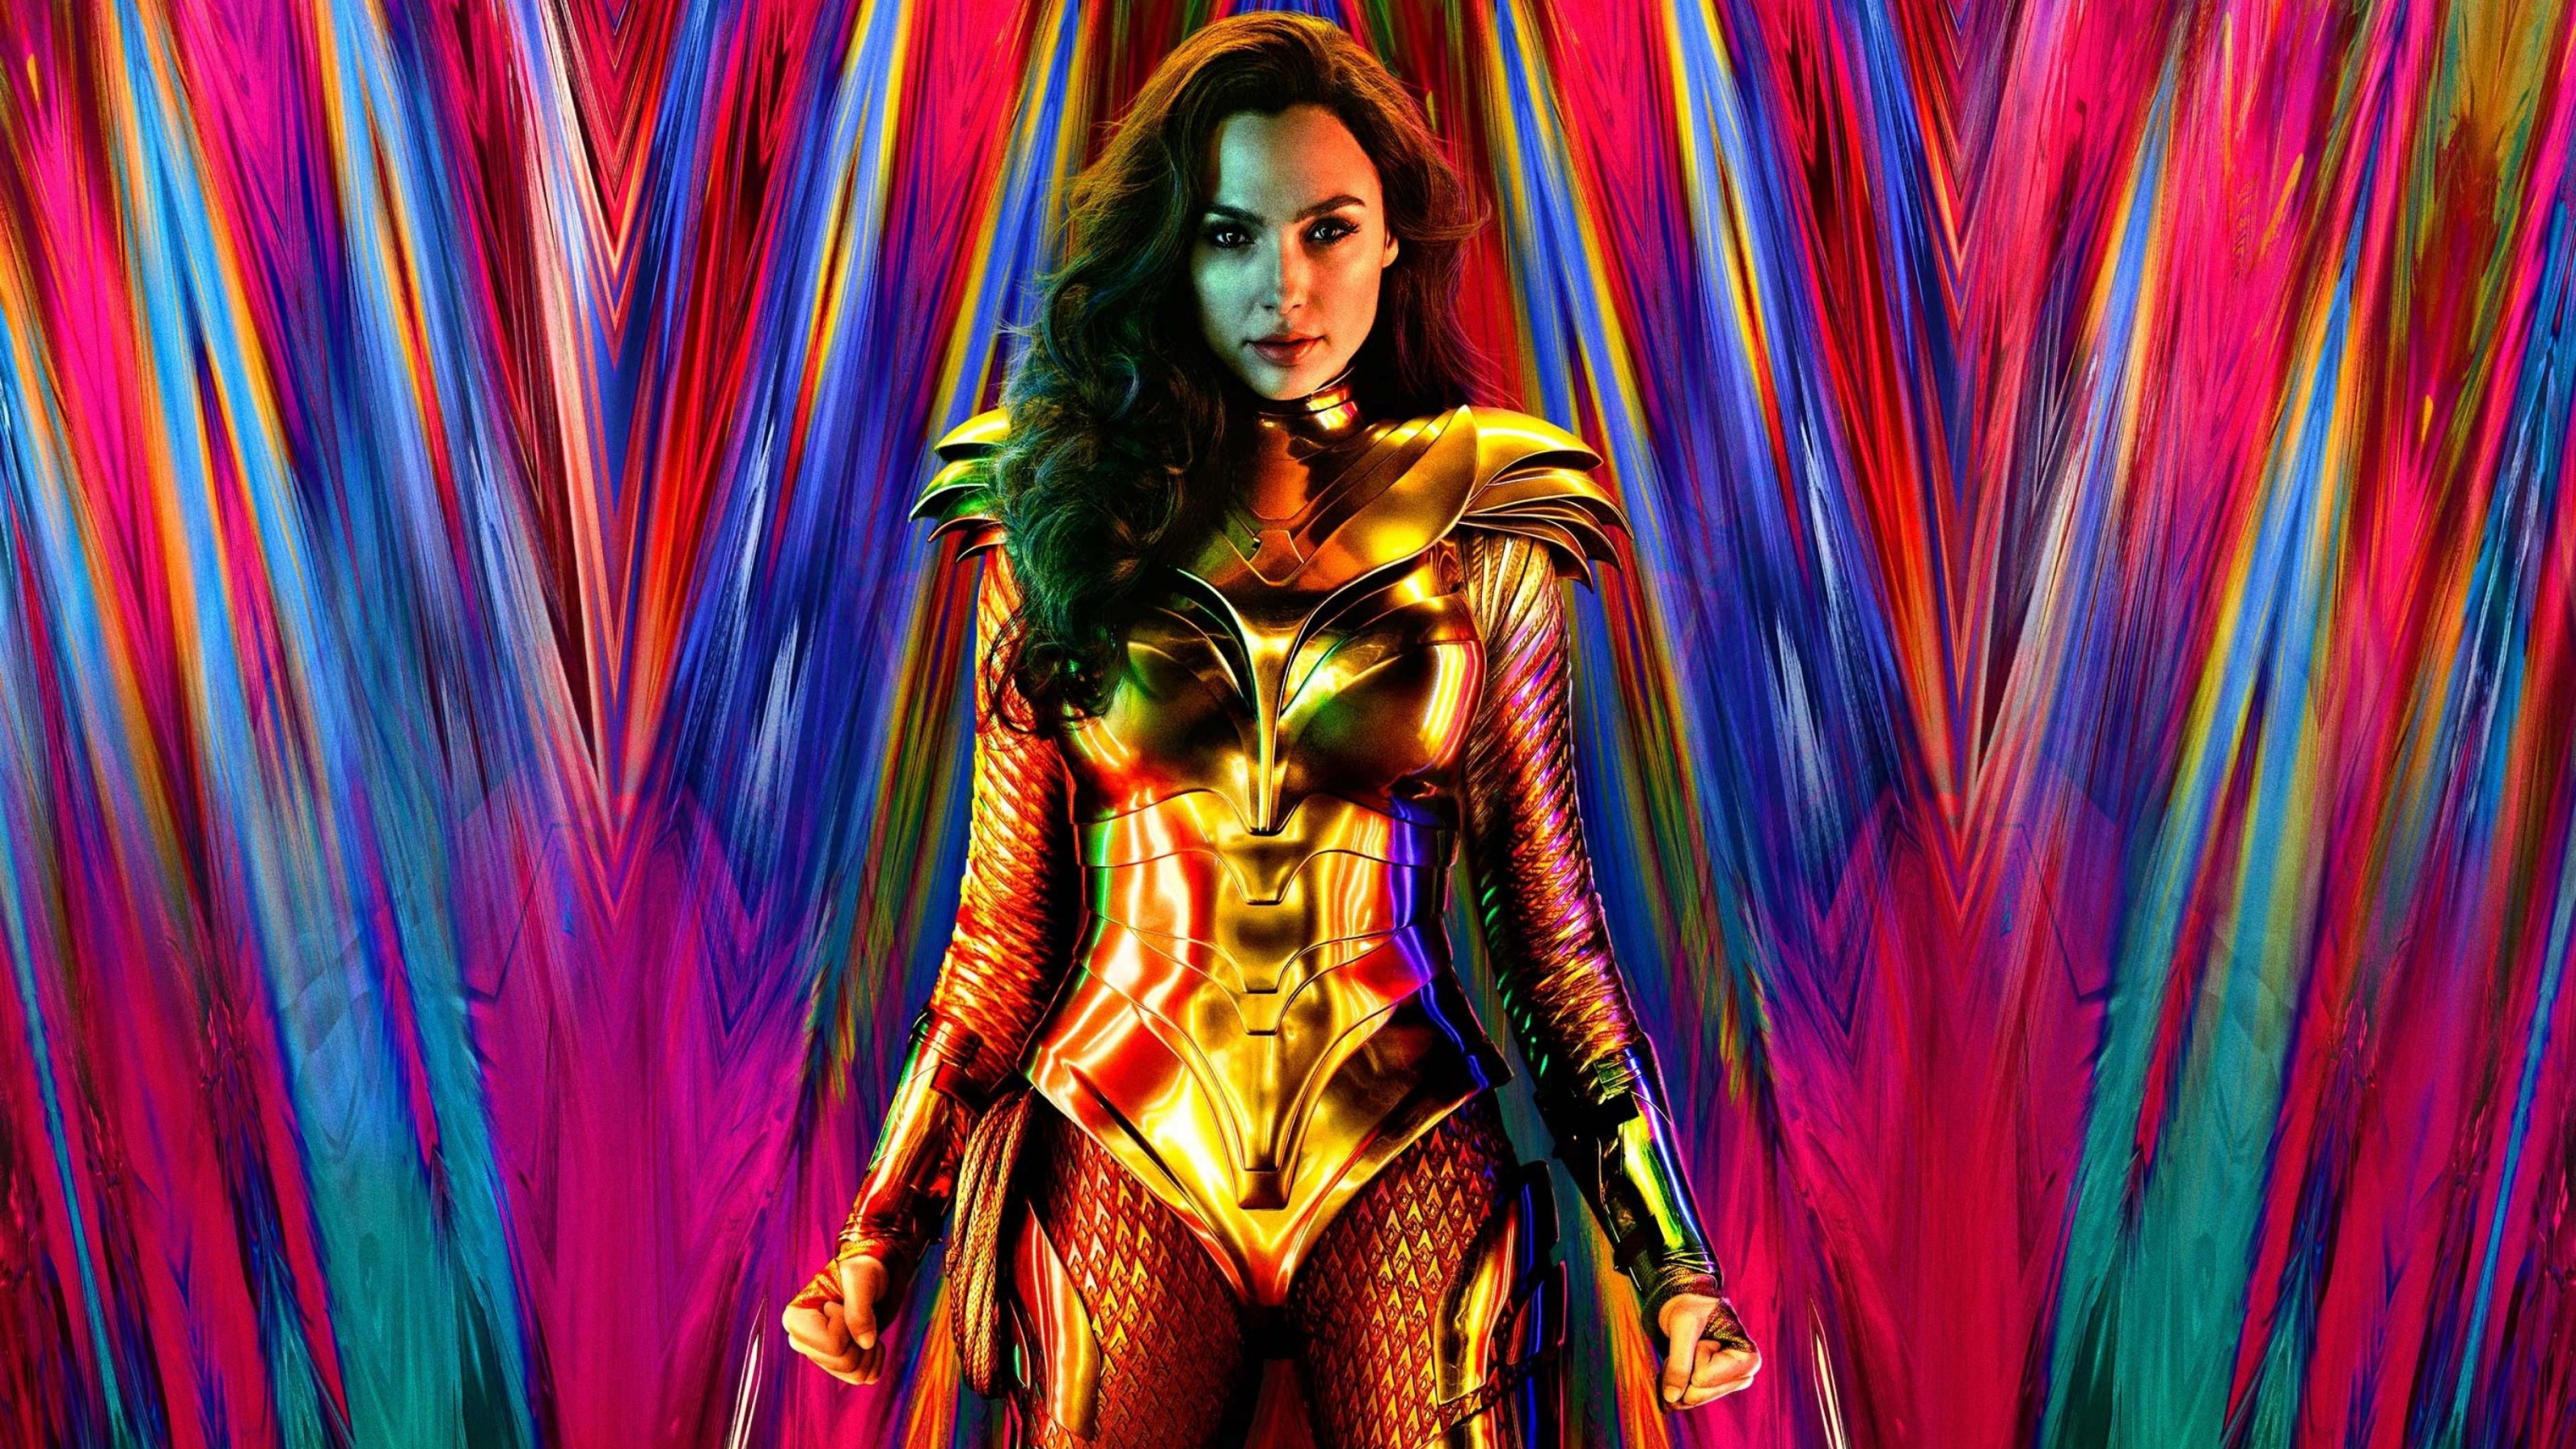 Wonder Woman 1984 Official Poster 4K Wallpaper, HD Movies 4K Wallpaper, Image, Photo and Background